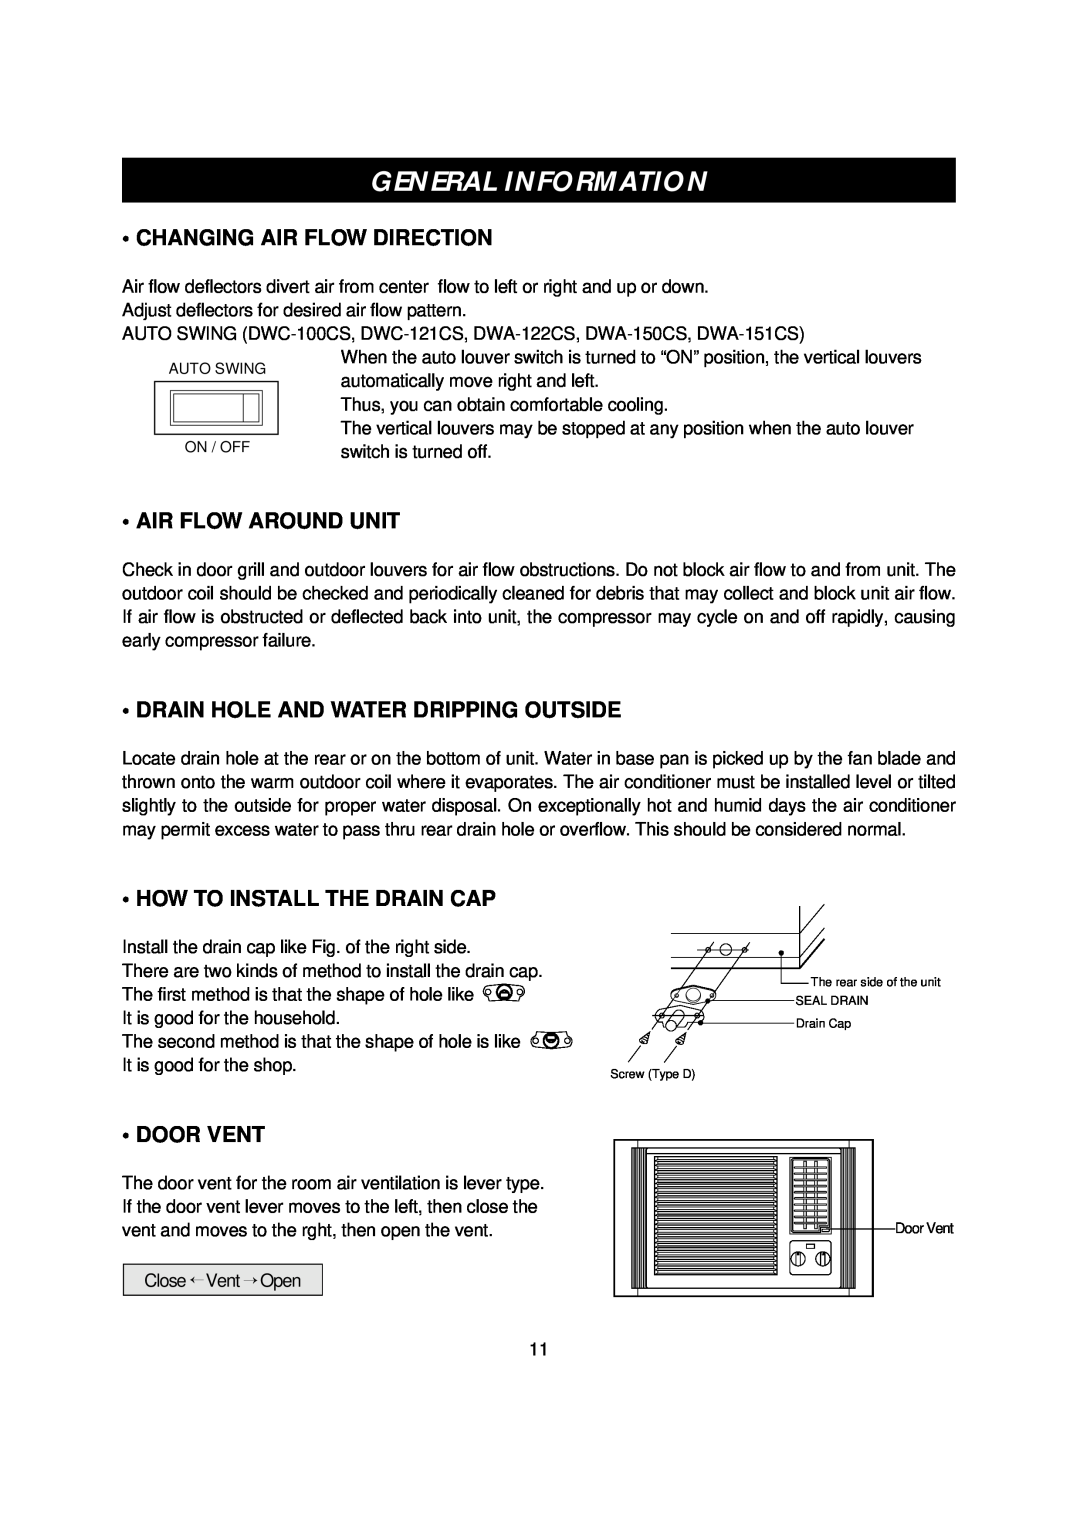 Daewoo DWC-121CS General Information, Changing Air Flow Direction, Air Flow Around Unit, How To Install The Drain Cap 